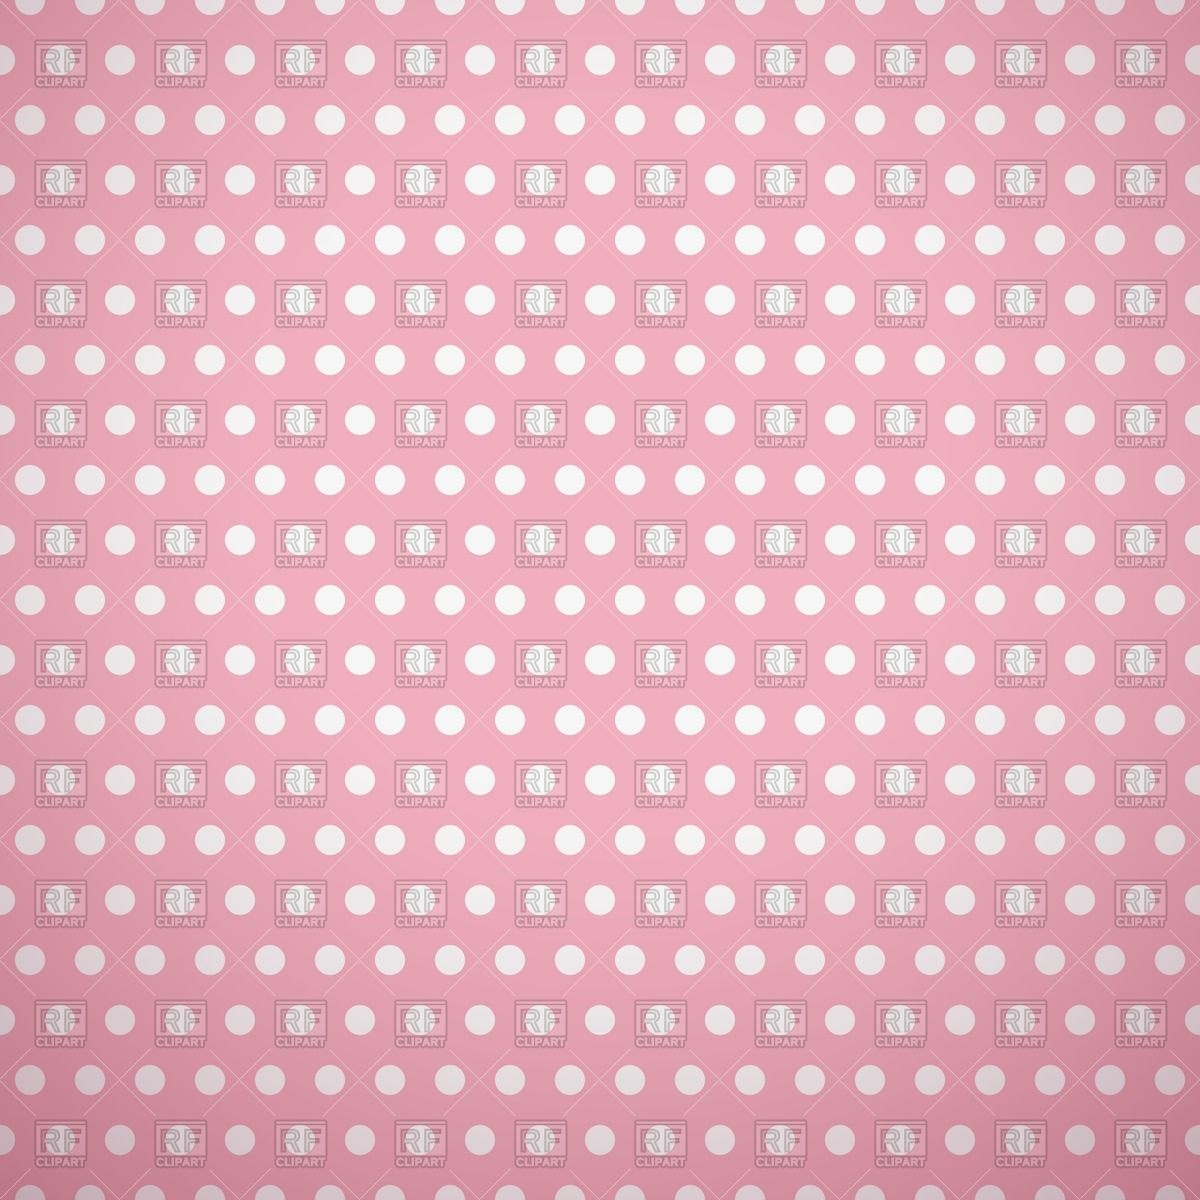 White Polka Dot Background Download Royalty Free Vector Clipart  Eps